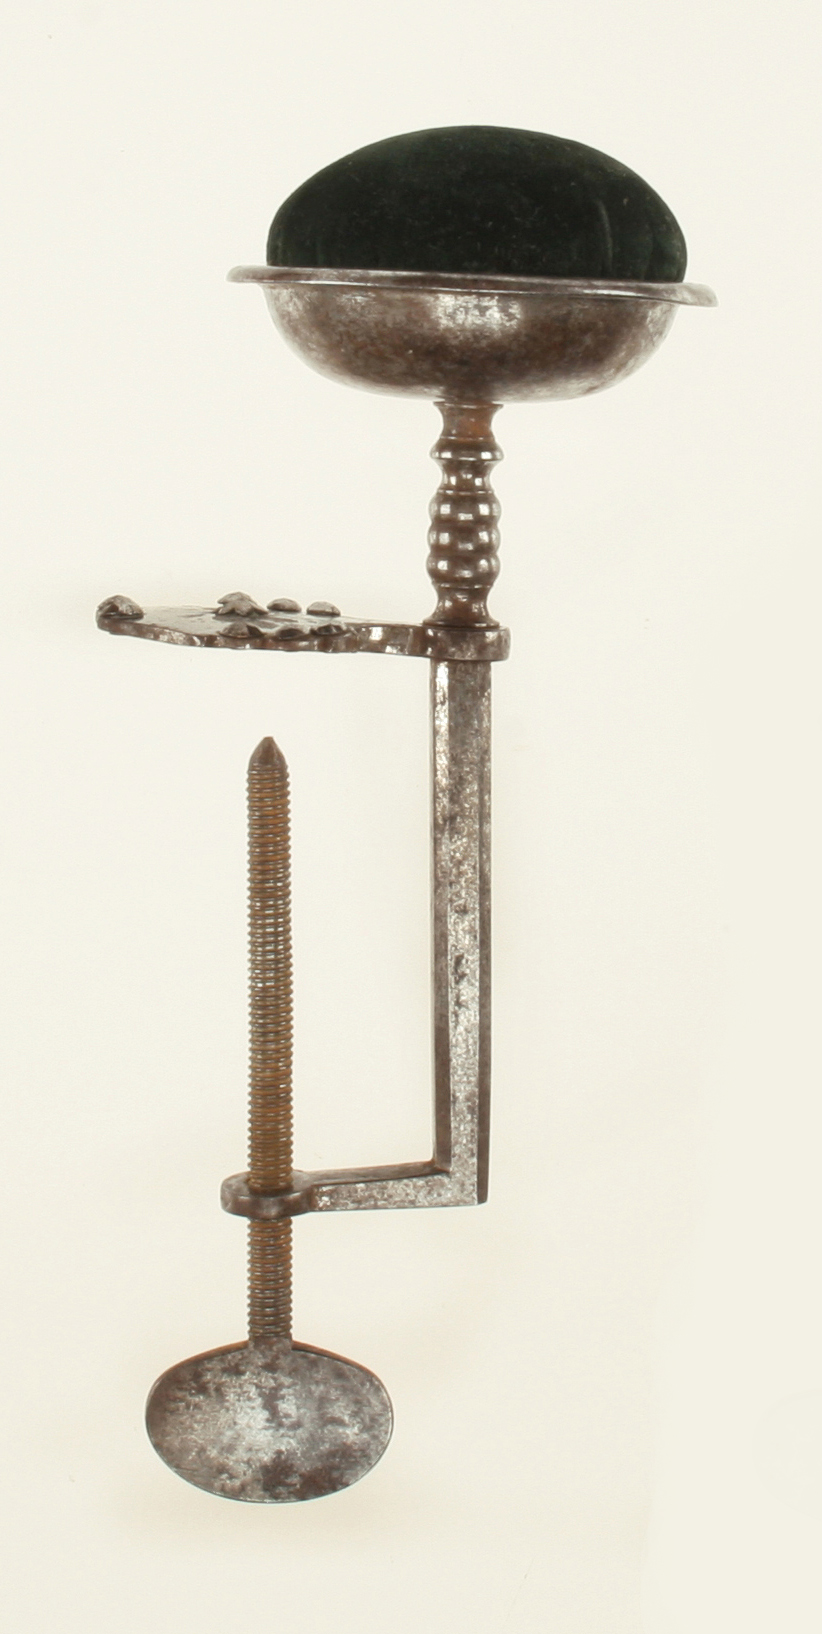 A fine 18c hand forged seamstresses table clamp pin cushion with attractive cut steel decoration